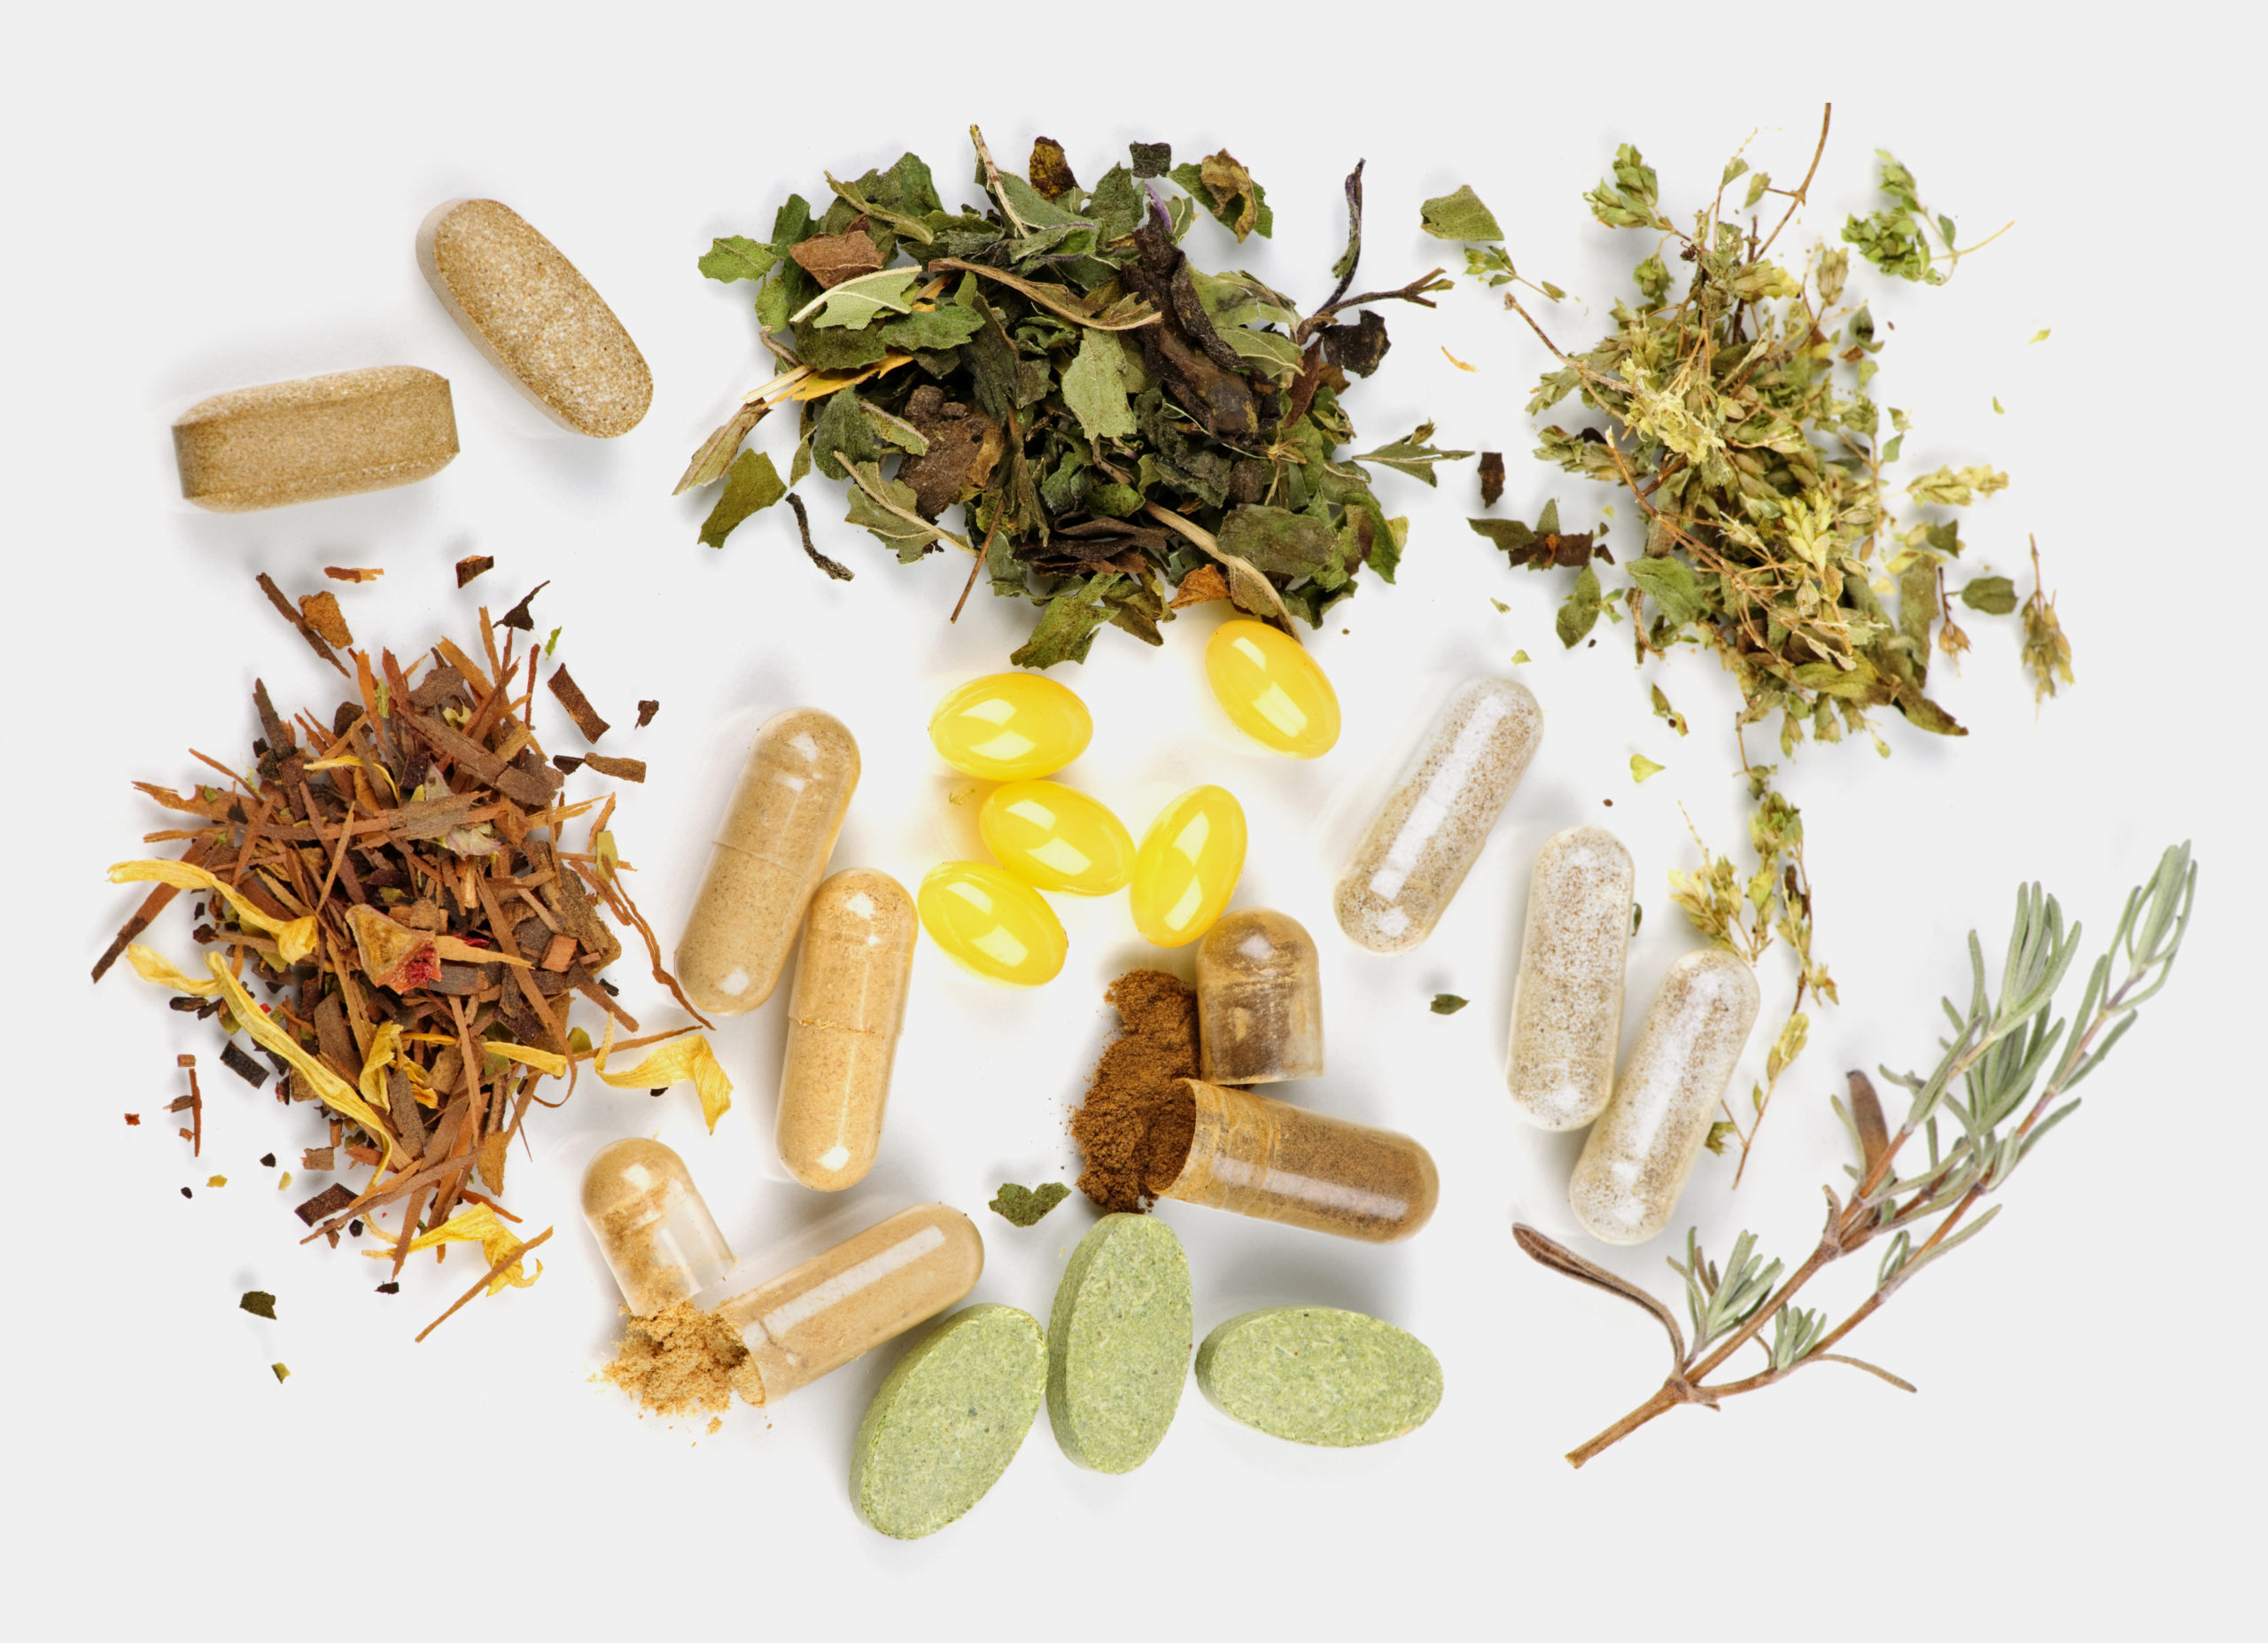 Herbs and pills separated into piles